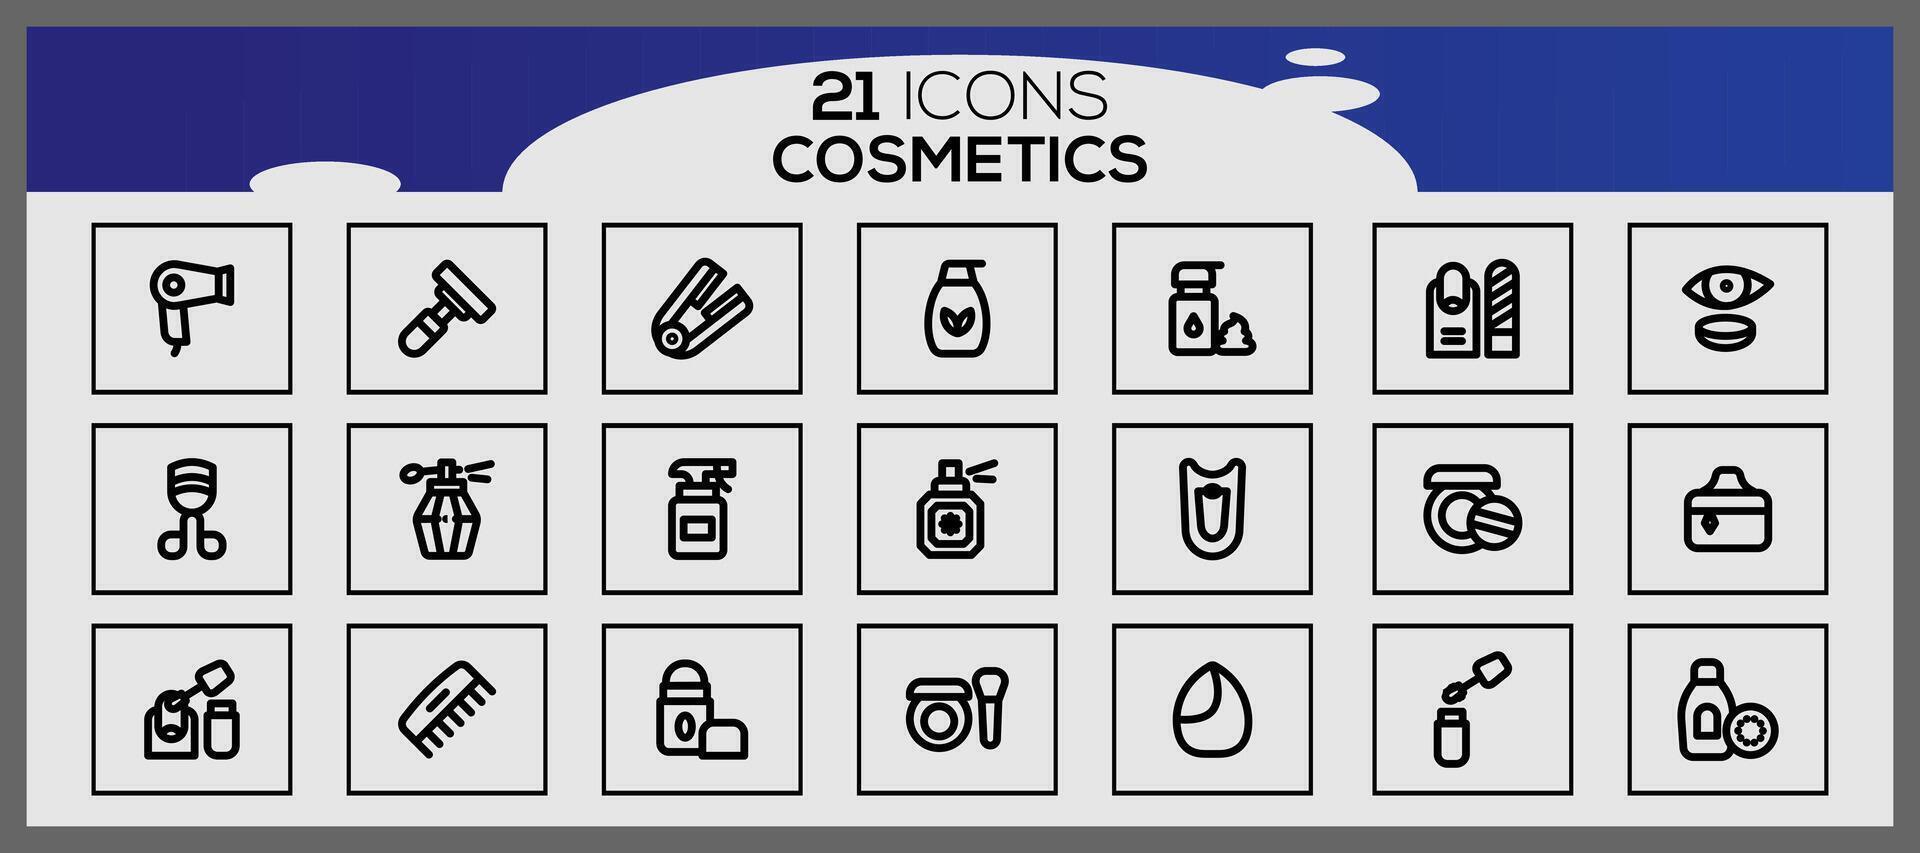 cosmetic line icon set with makeup beauty line icons beauty accessories set makeup accessories. vector